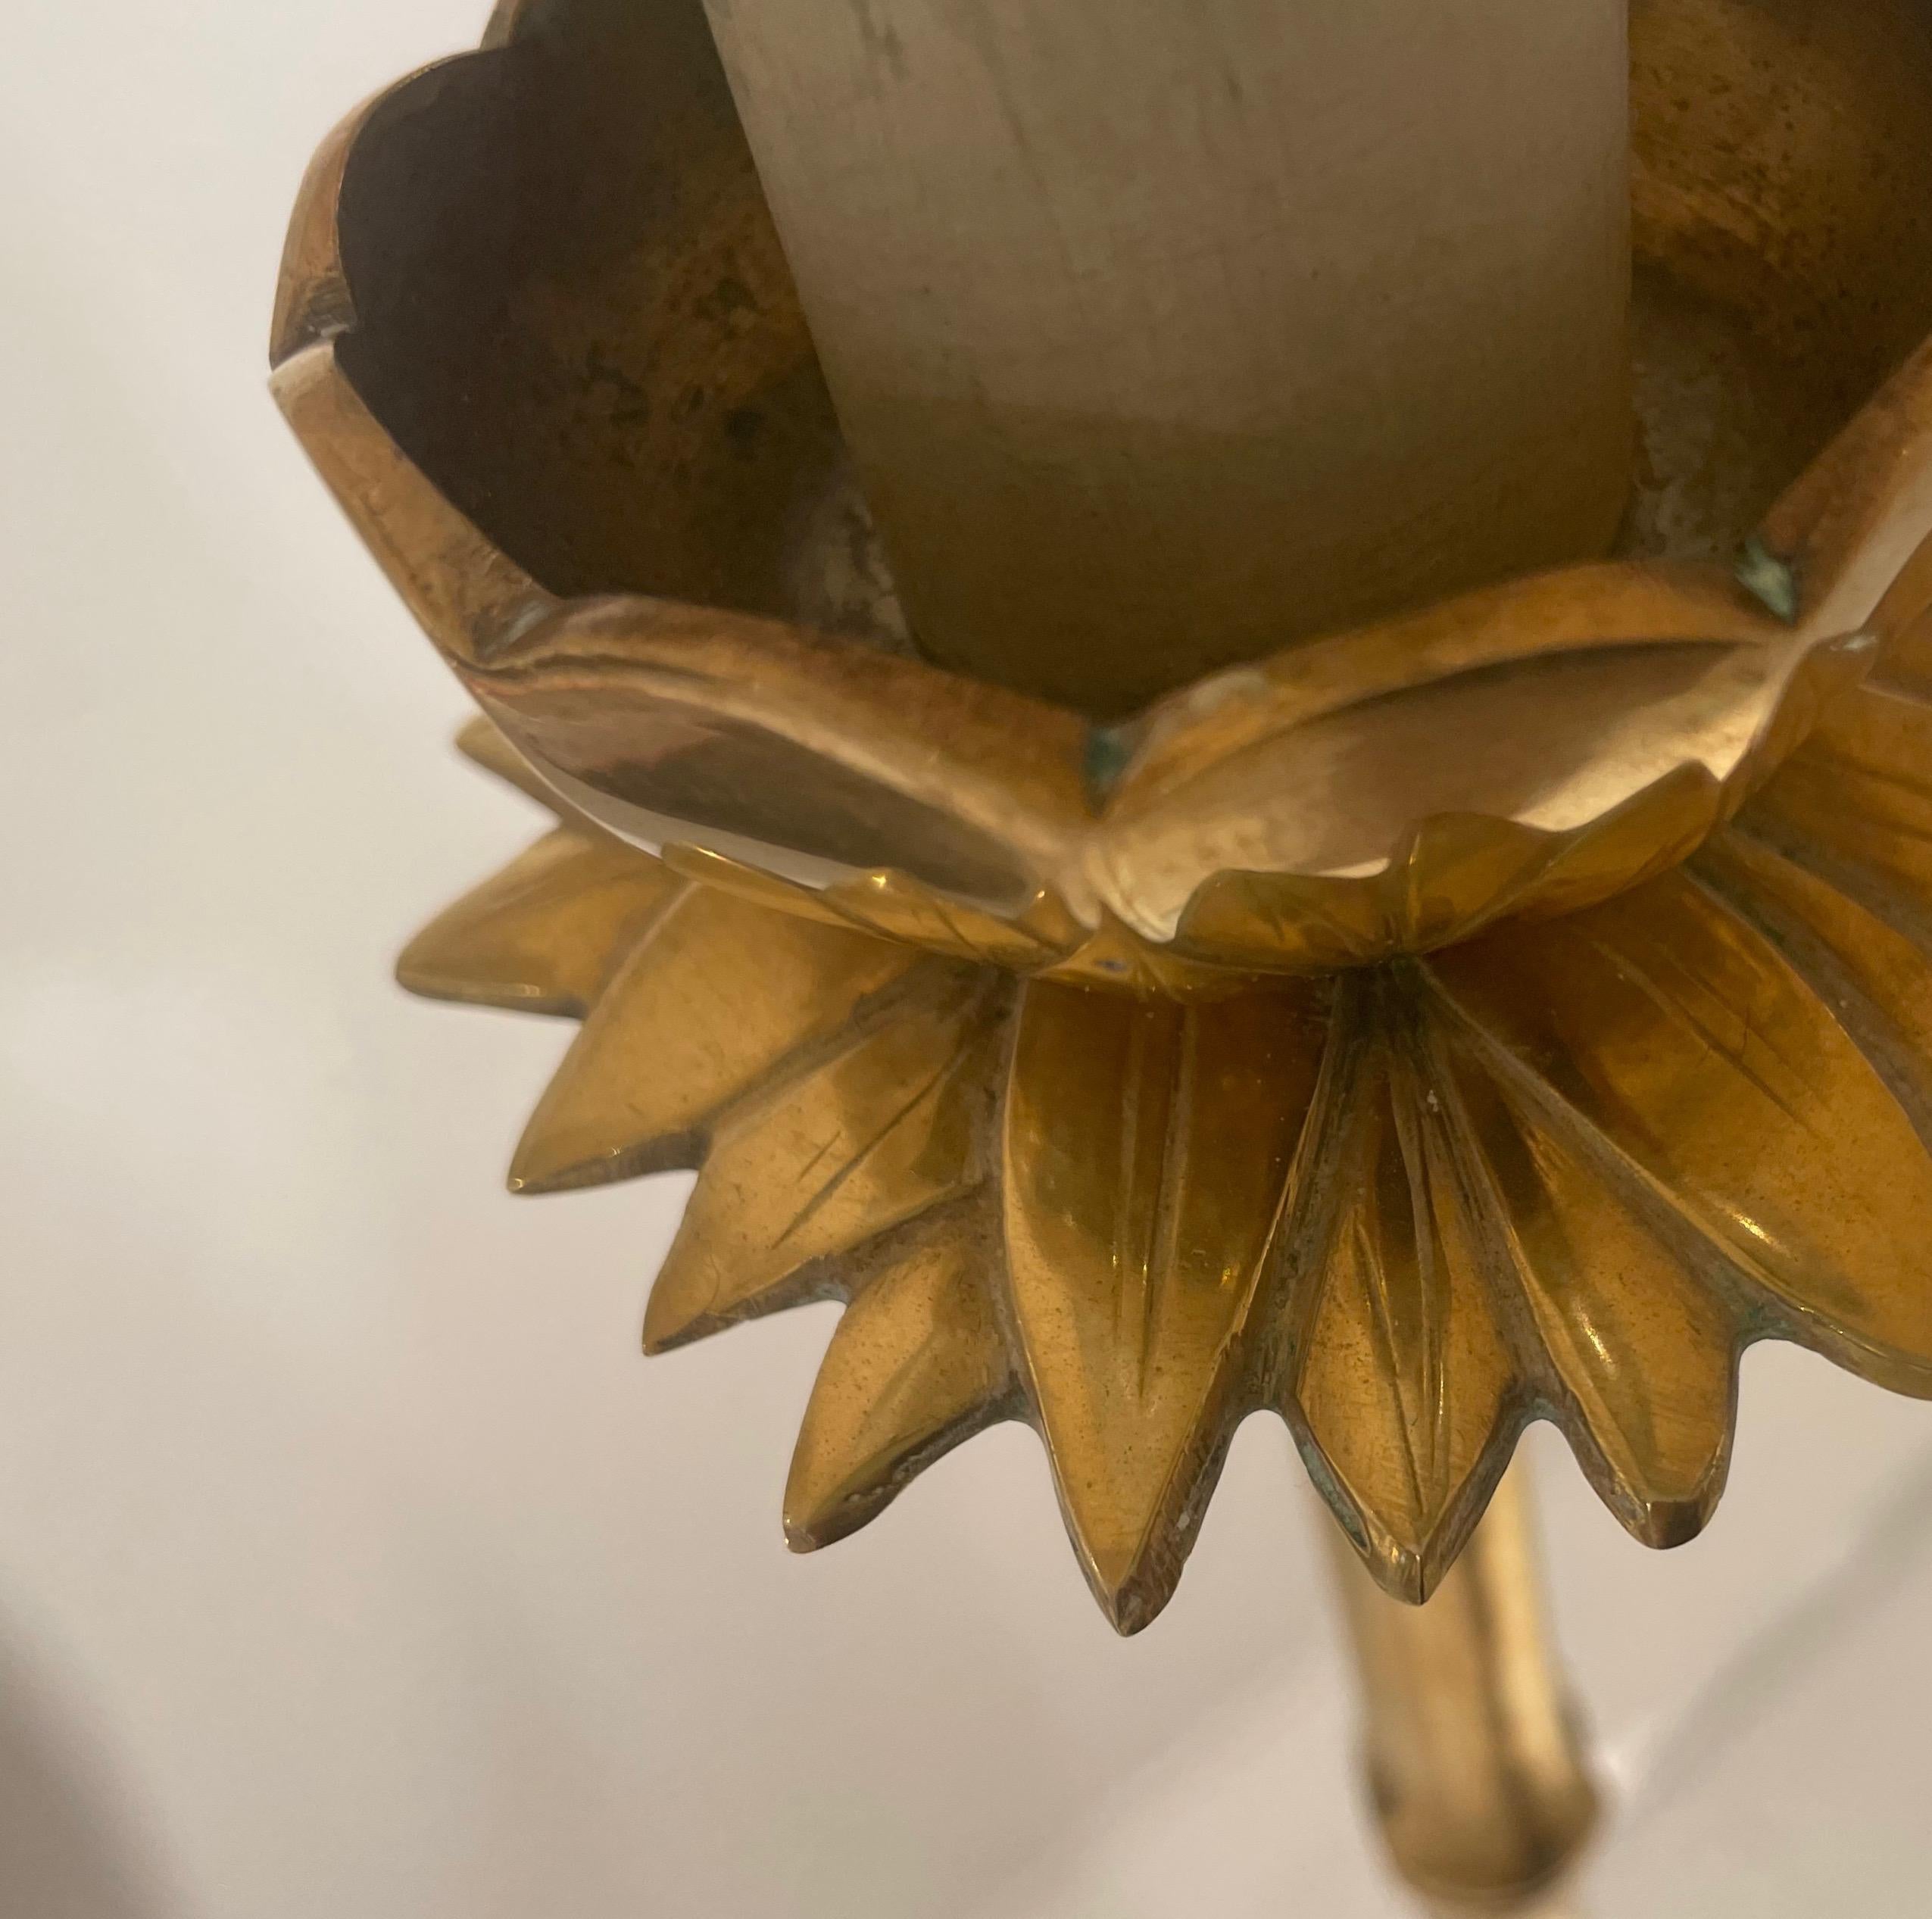 Elegant  brass faux bamboo floor lamp with a lotus flower finely carved on top.
One light and an opaline reflector.
By Maison Bagués - France.
1980.